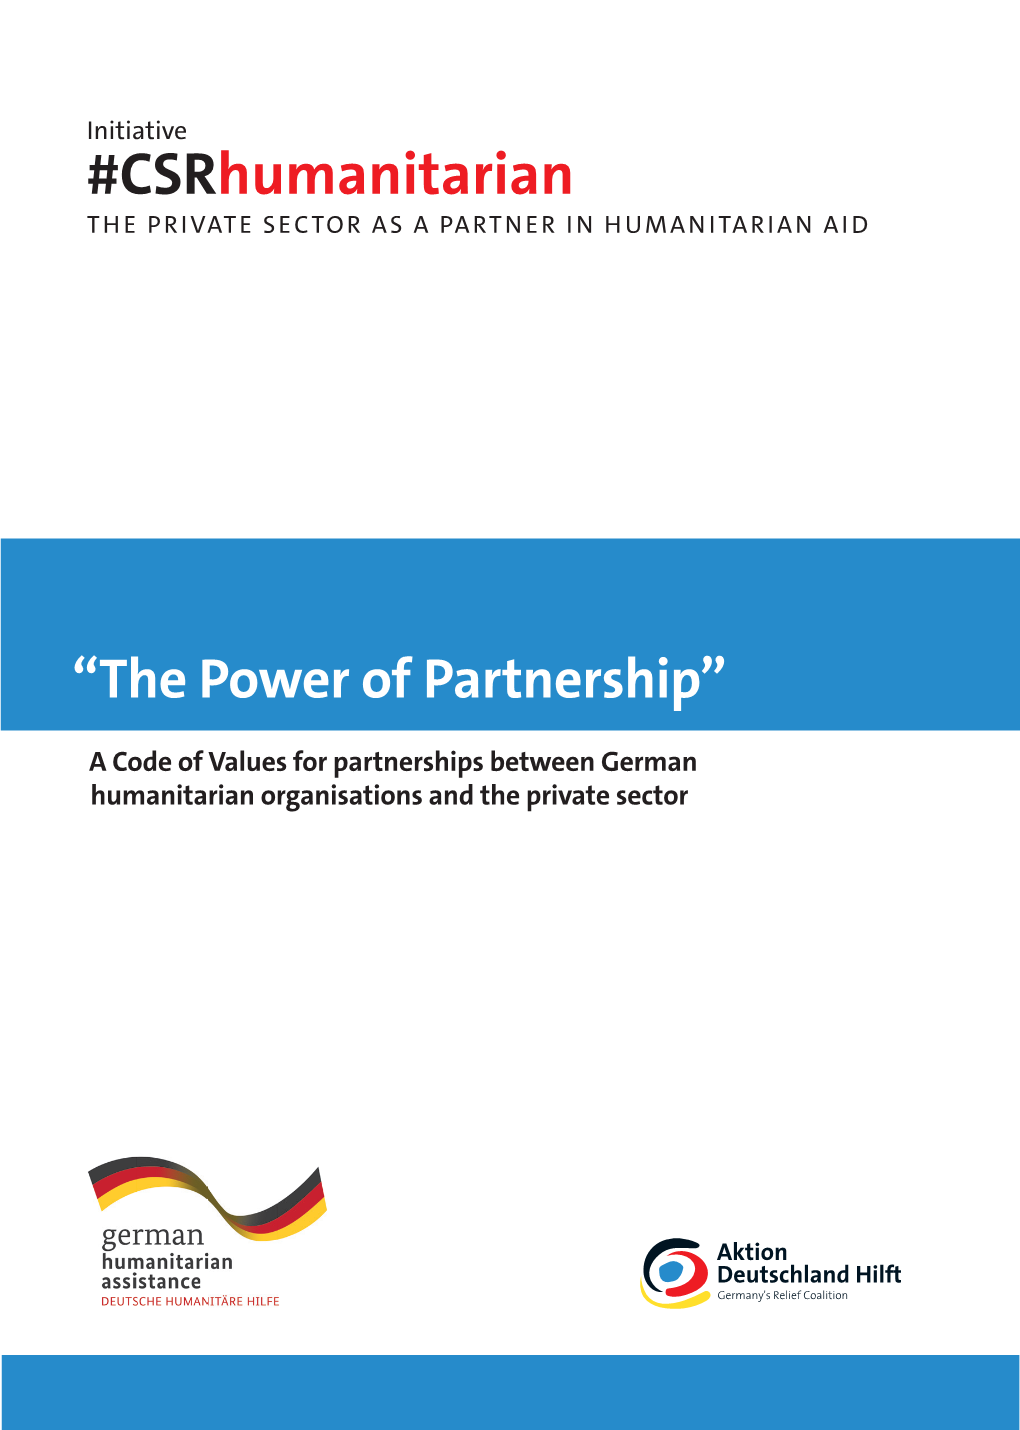 Csrhumanitarian the PRIVATE SECTOR AS a PARTNER in HUMANITARIAN AID